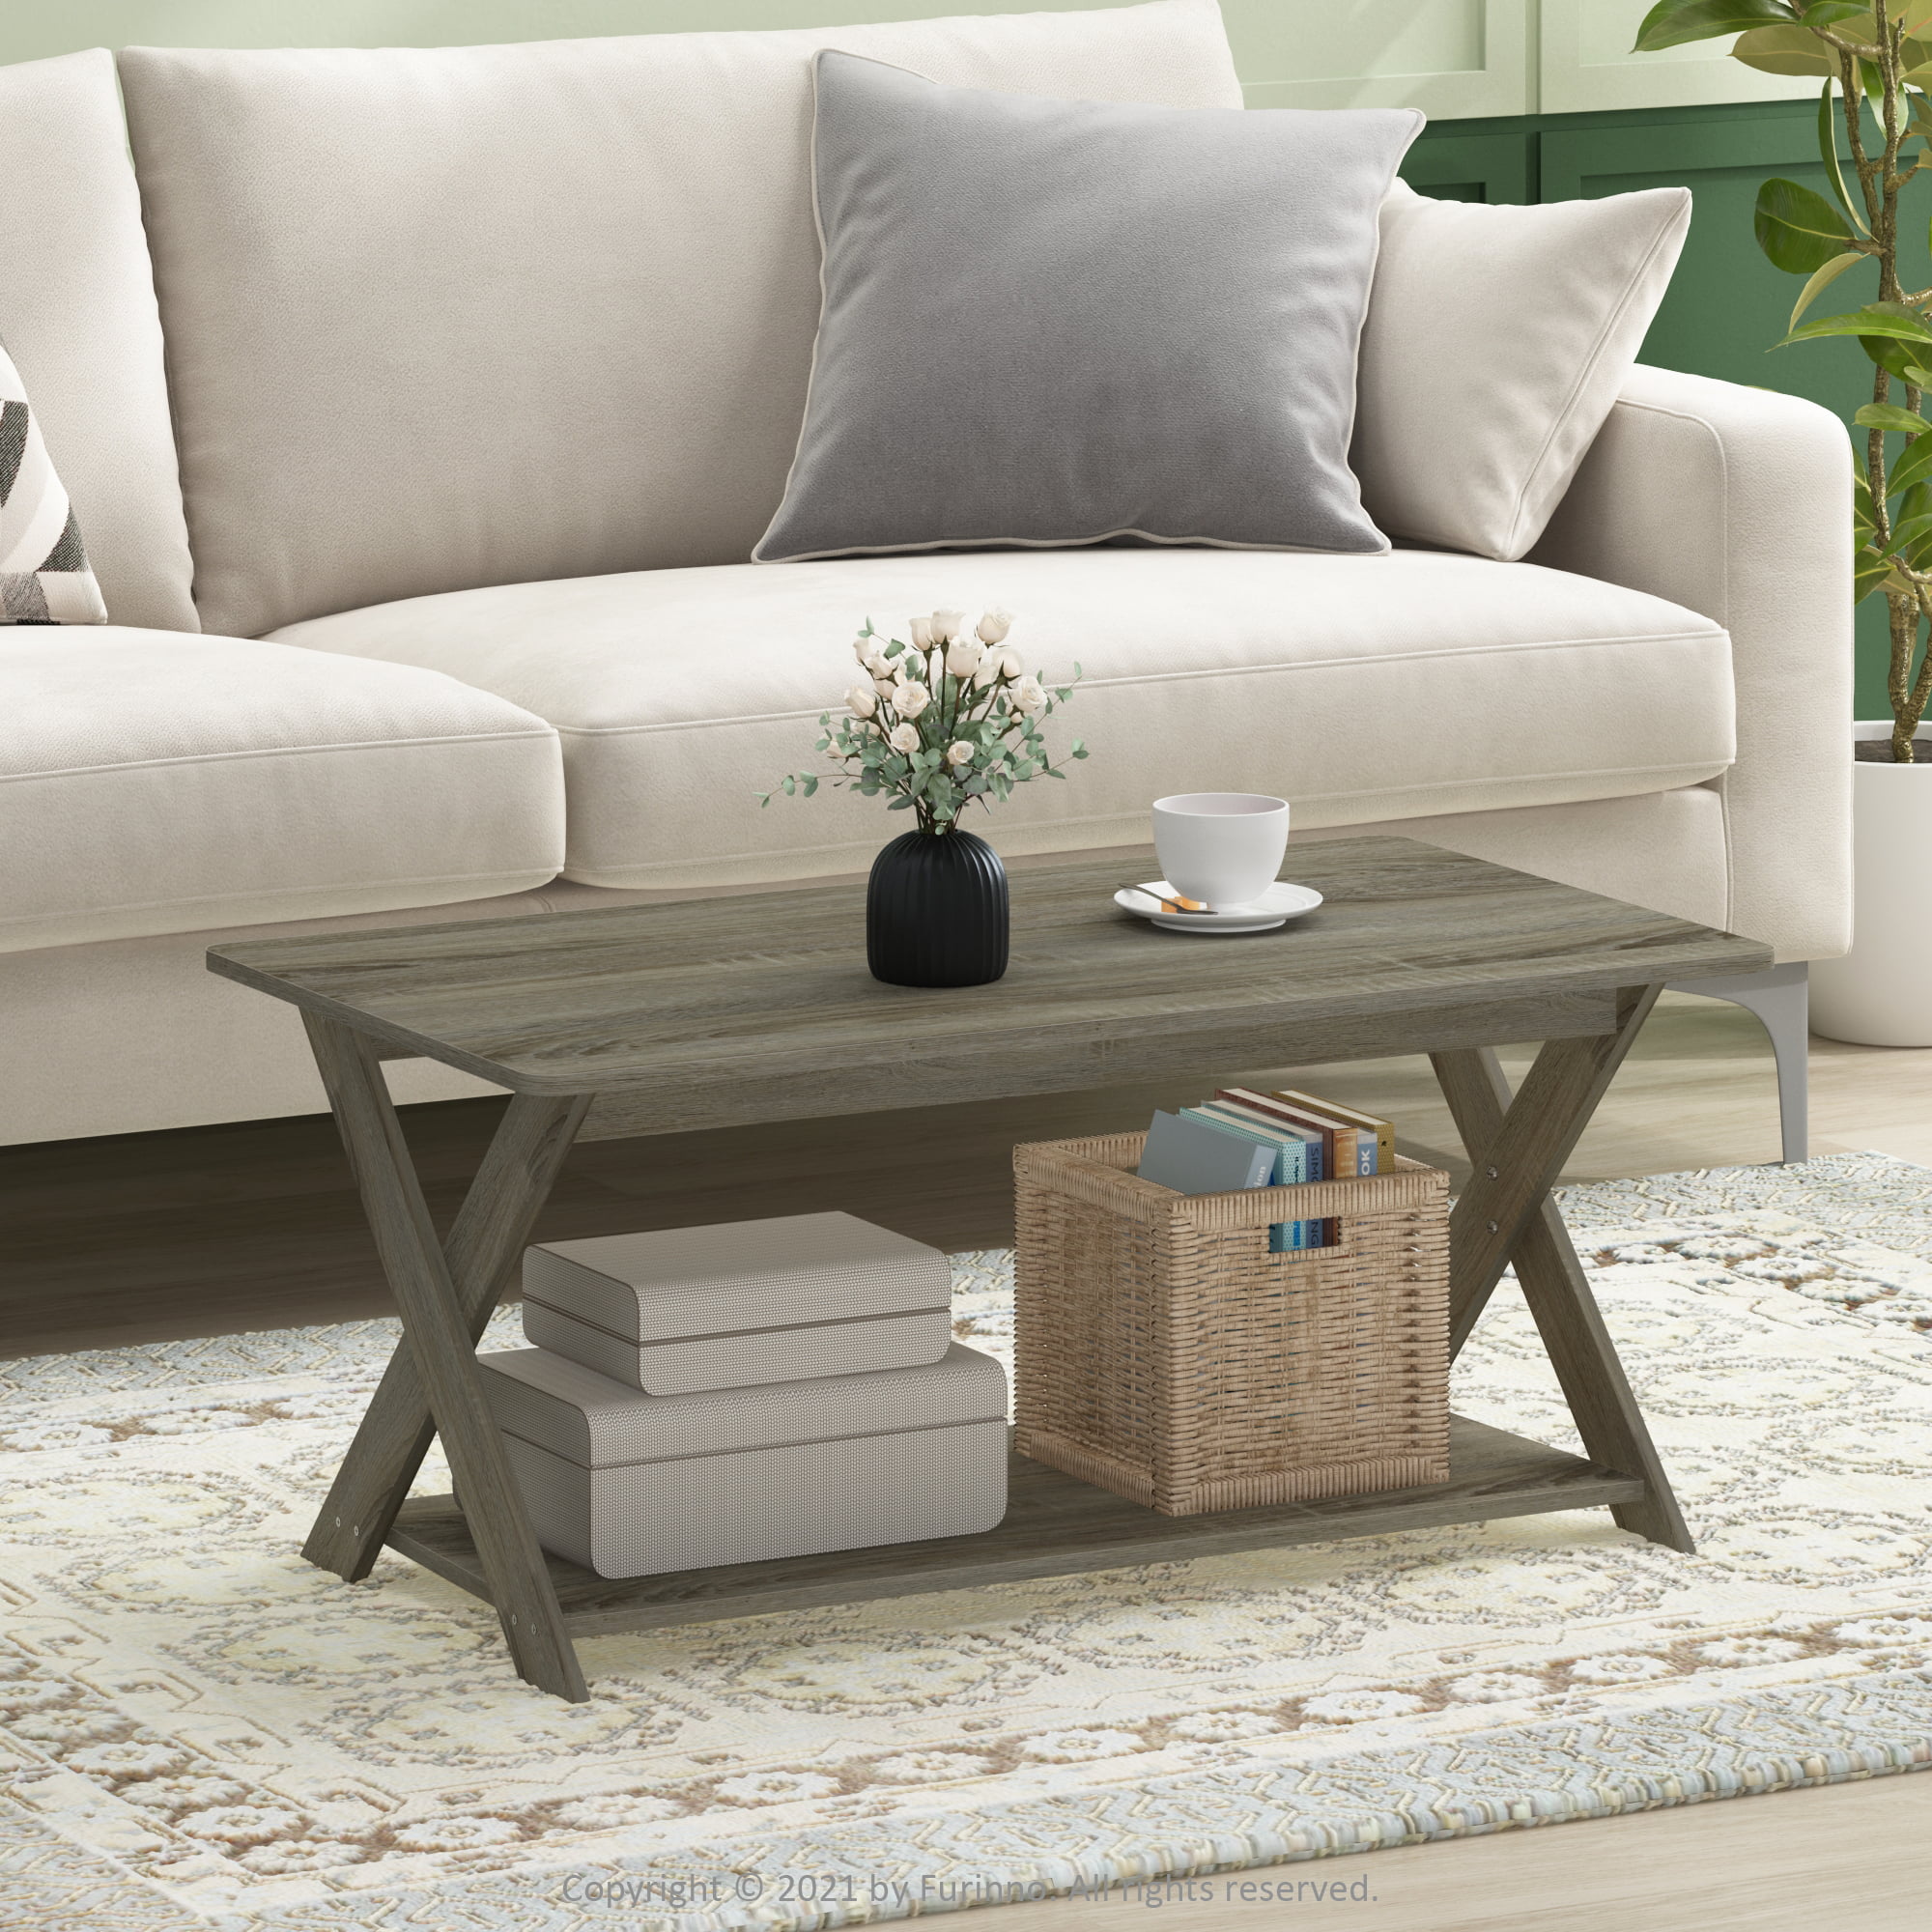 Modern Criss-Crossed Coffee Table in French Colors